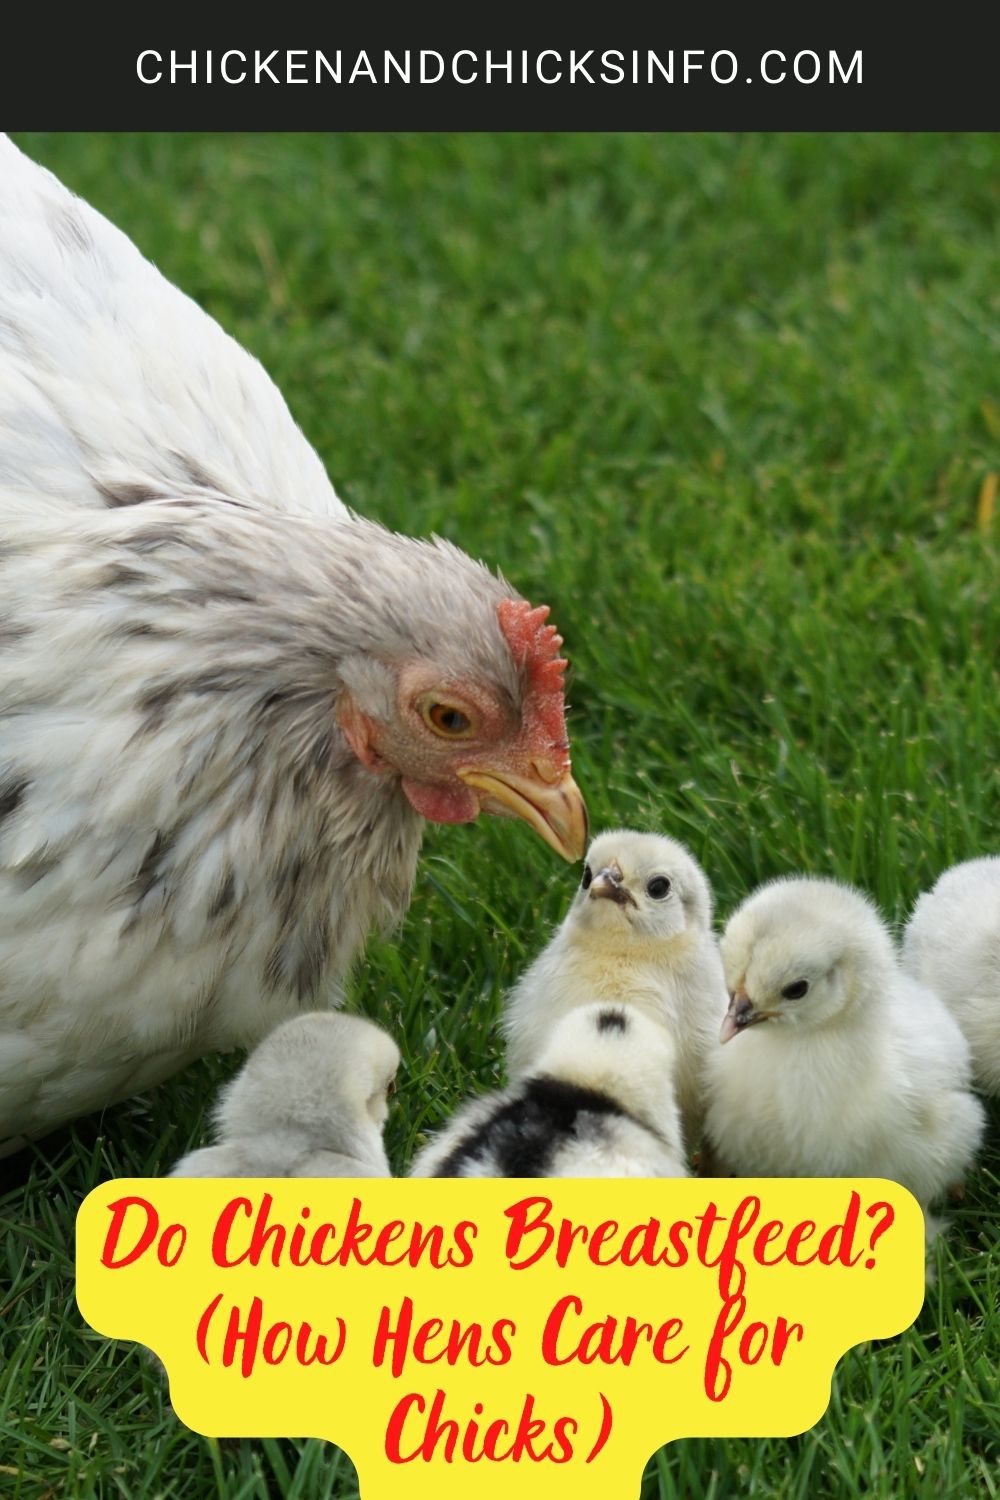 Do Chickens Breastfeed? (How Hens Care for Chicks) poster.
